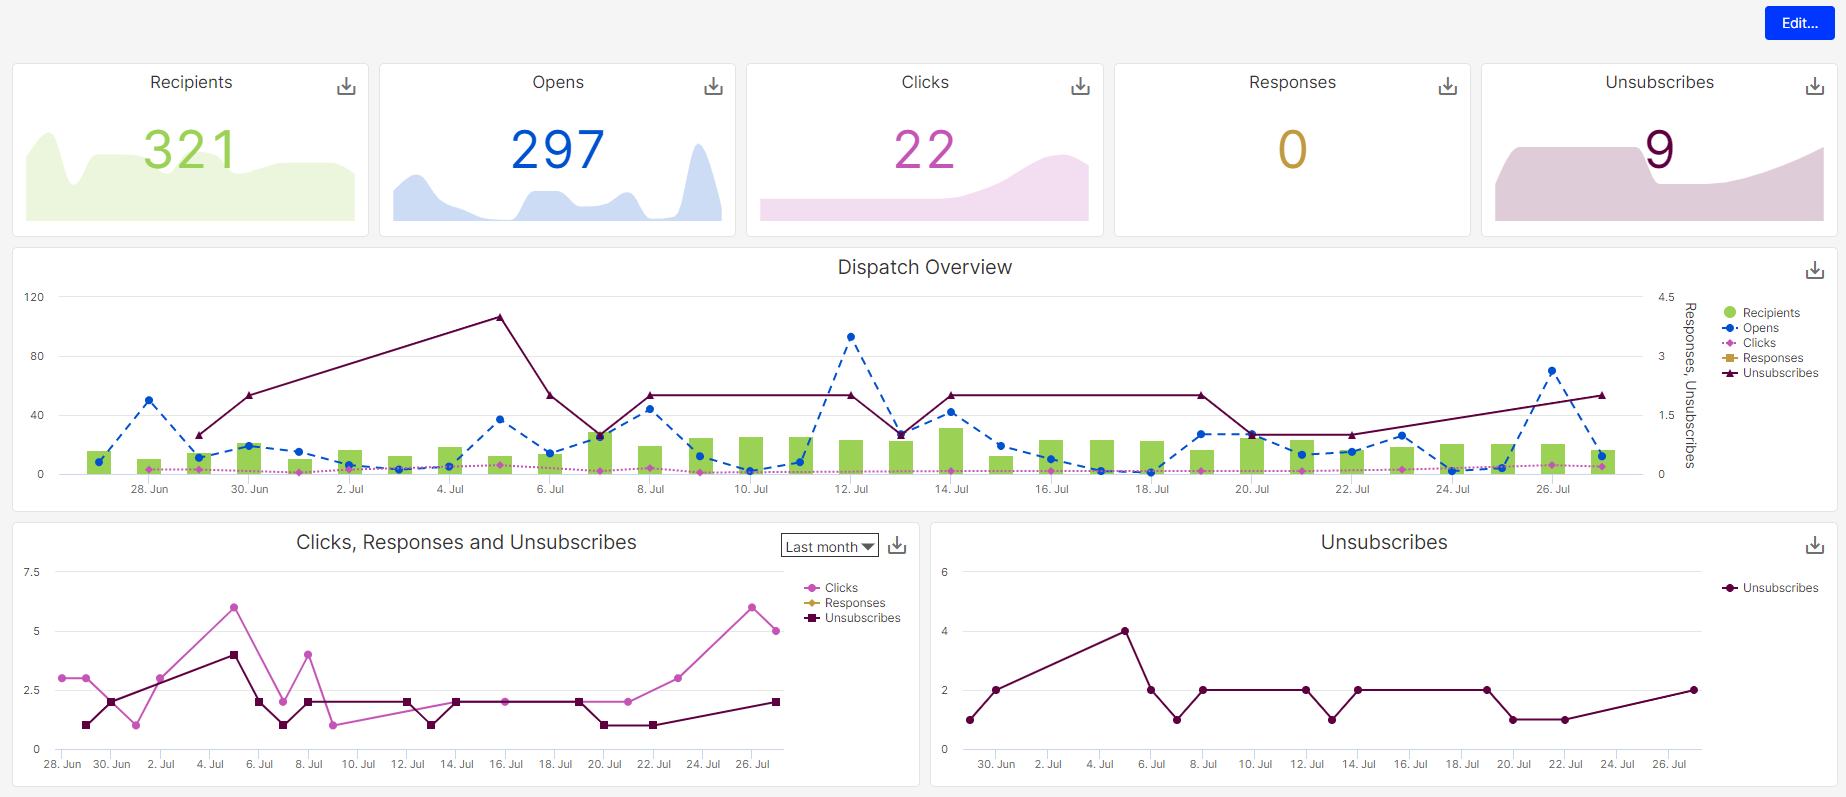 Image: Performance Dashboard overview